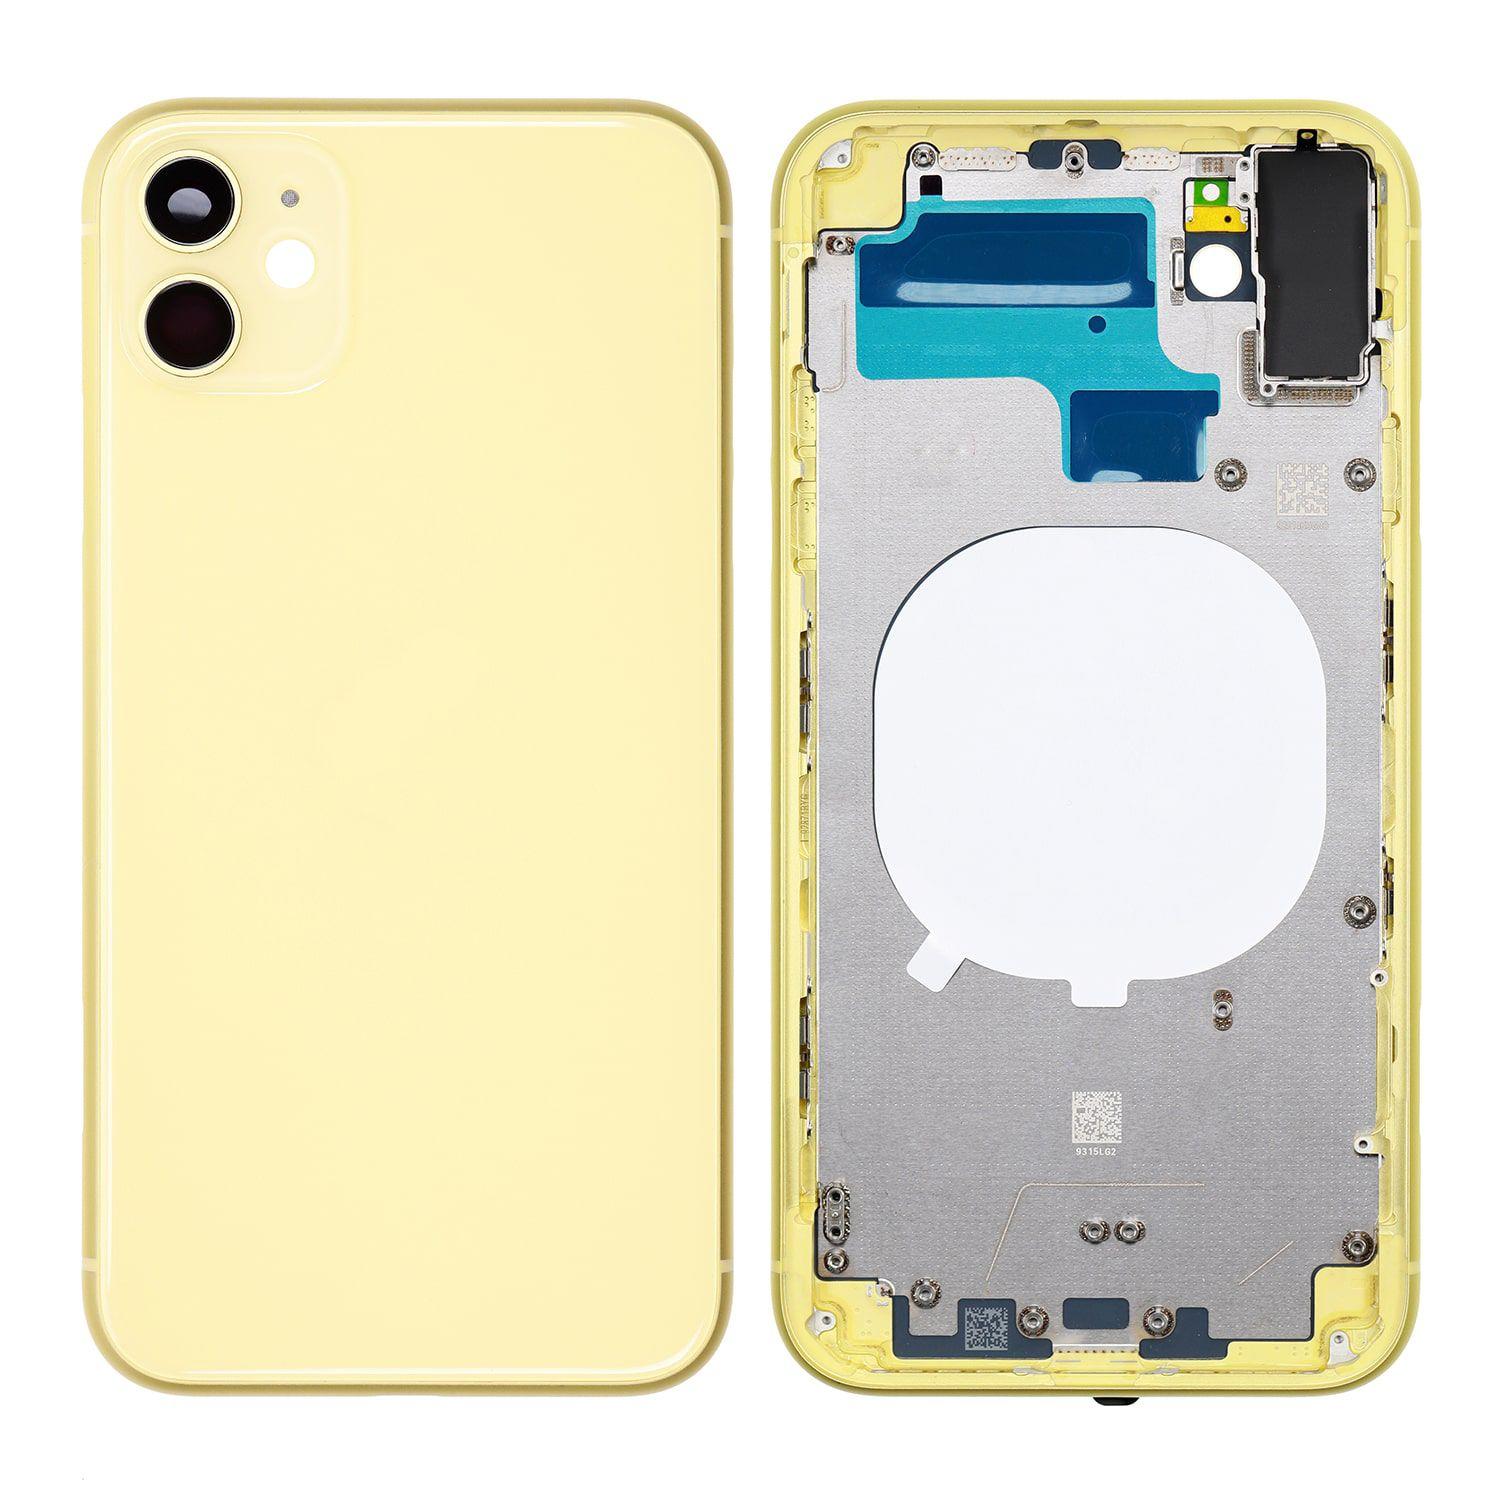 Body for iPhone 11 + back cover yellow